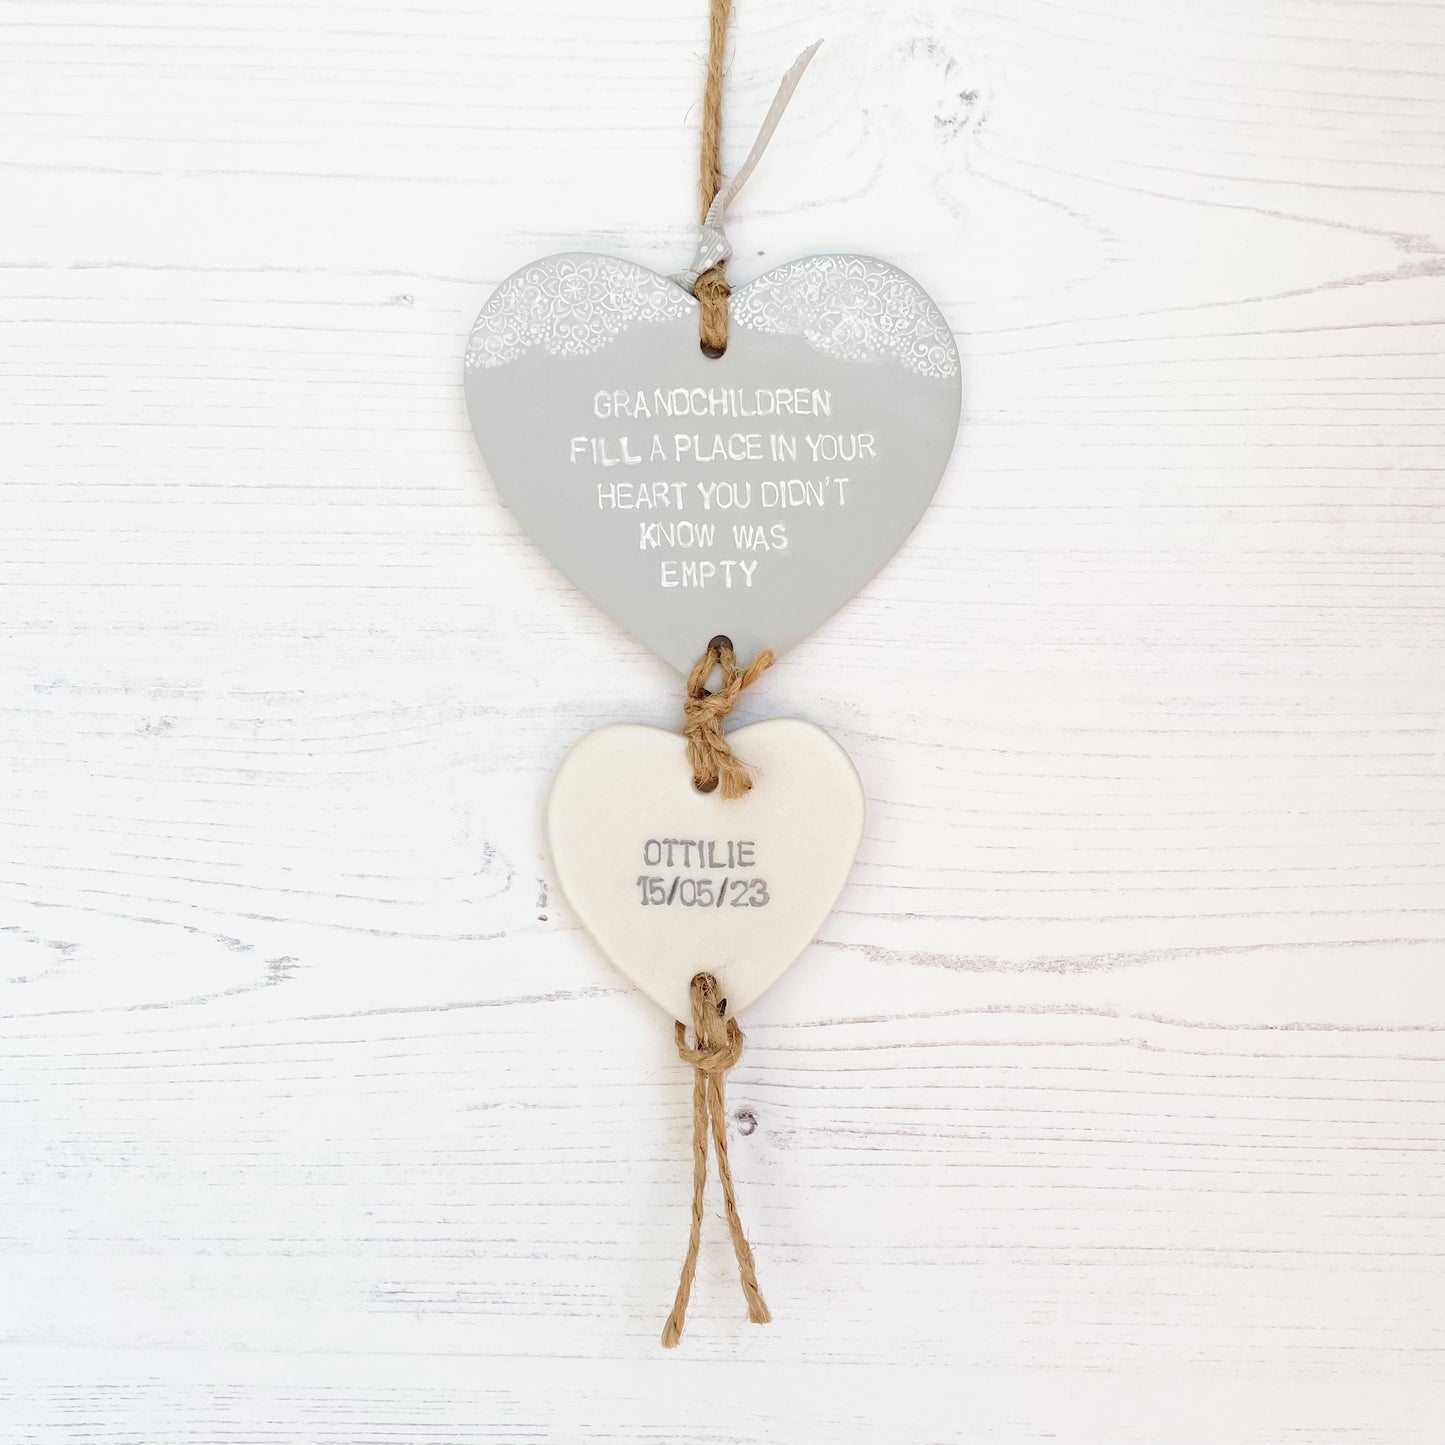 Grandparent keepsake with a large grey polymer clay heart with a quote “Grandchildren fill a place in your heart you didn’t know was empty” and a small pearlised white heart hanging below with a name and date of birth